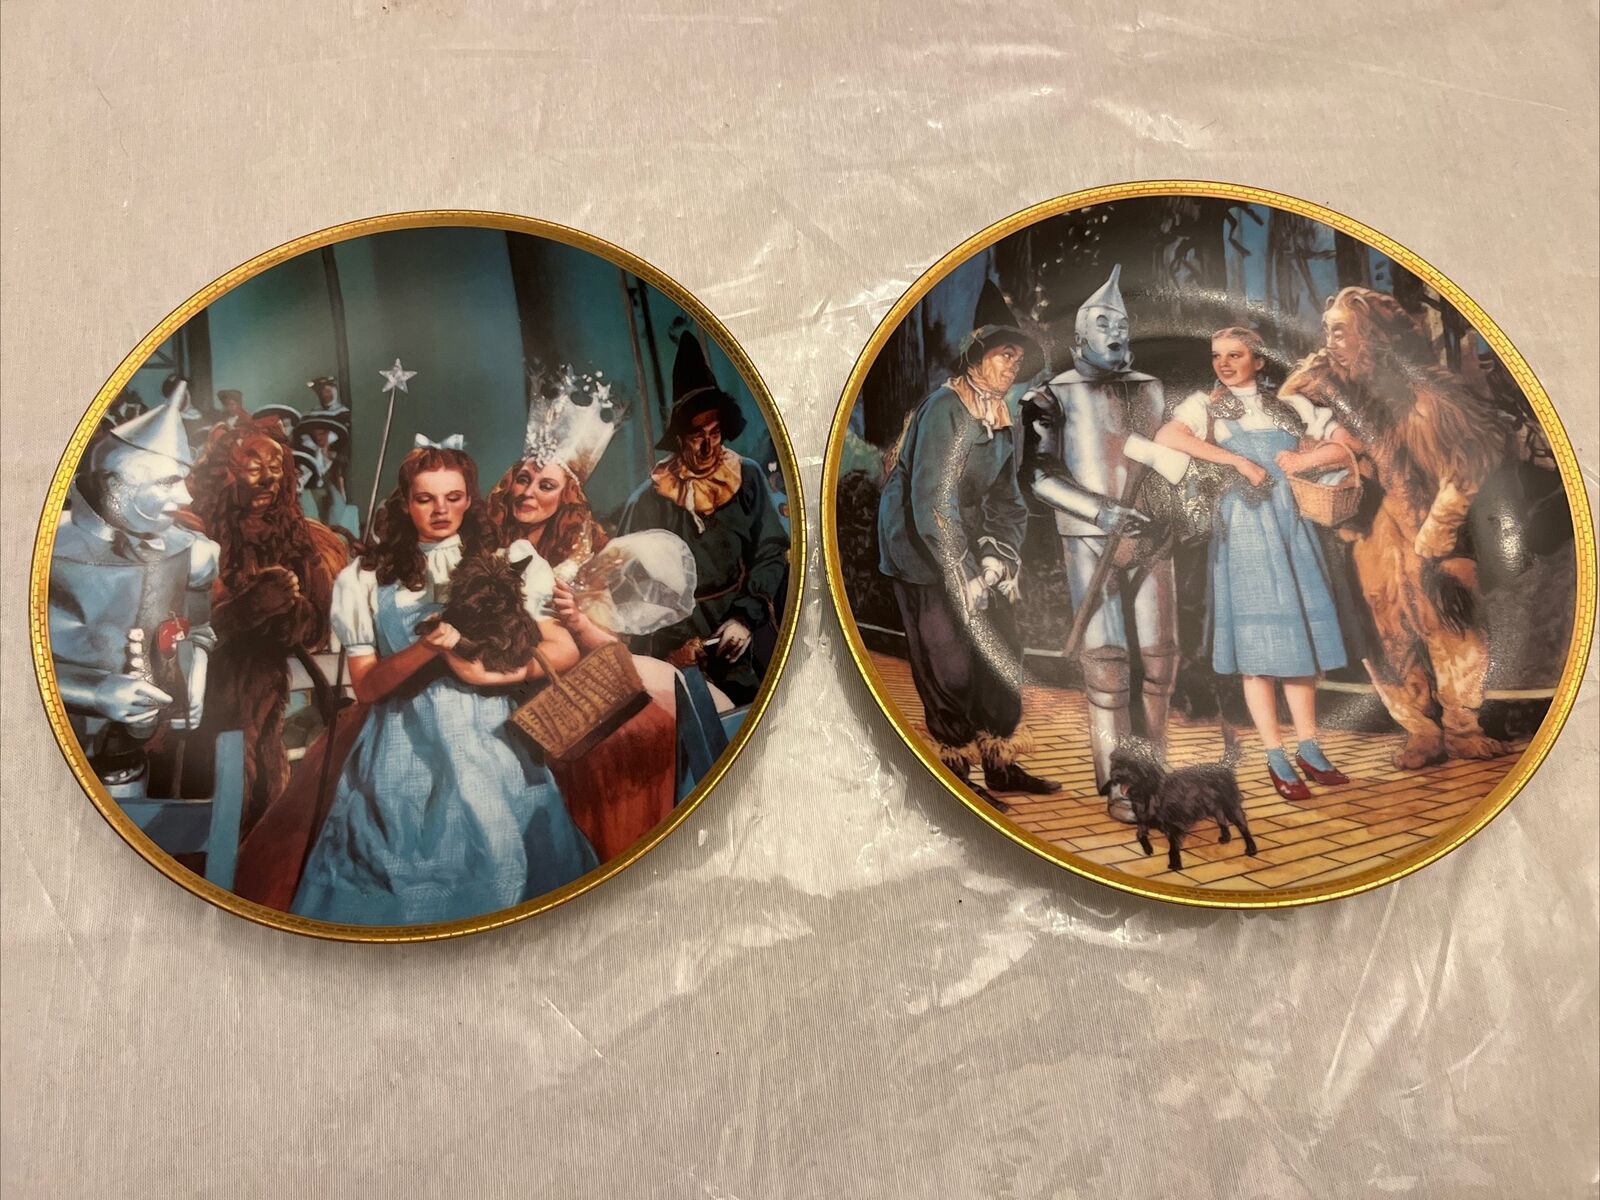 Set Of 2 - Wizard Of Oz. The Hamilton Collection Plates, Knowles.